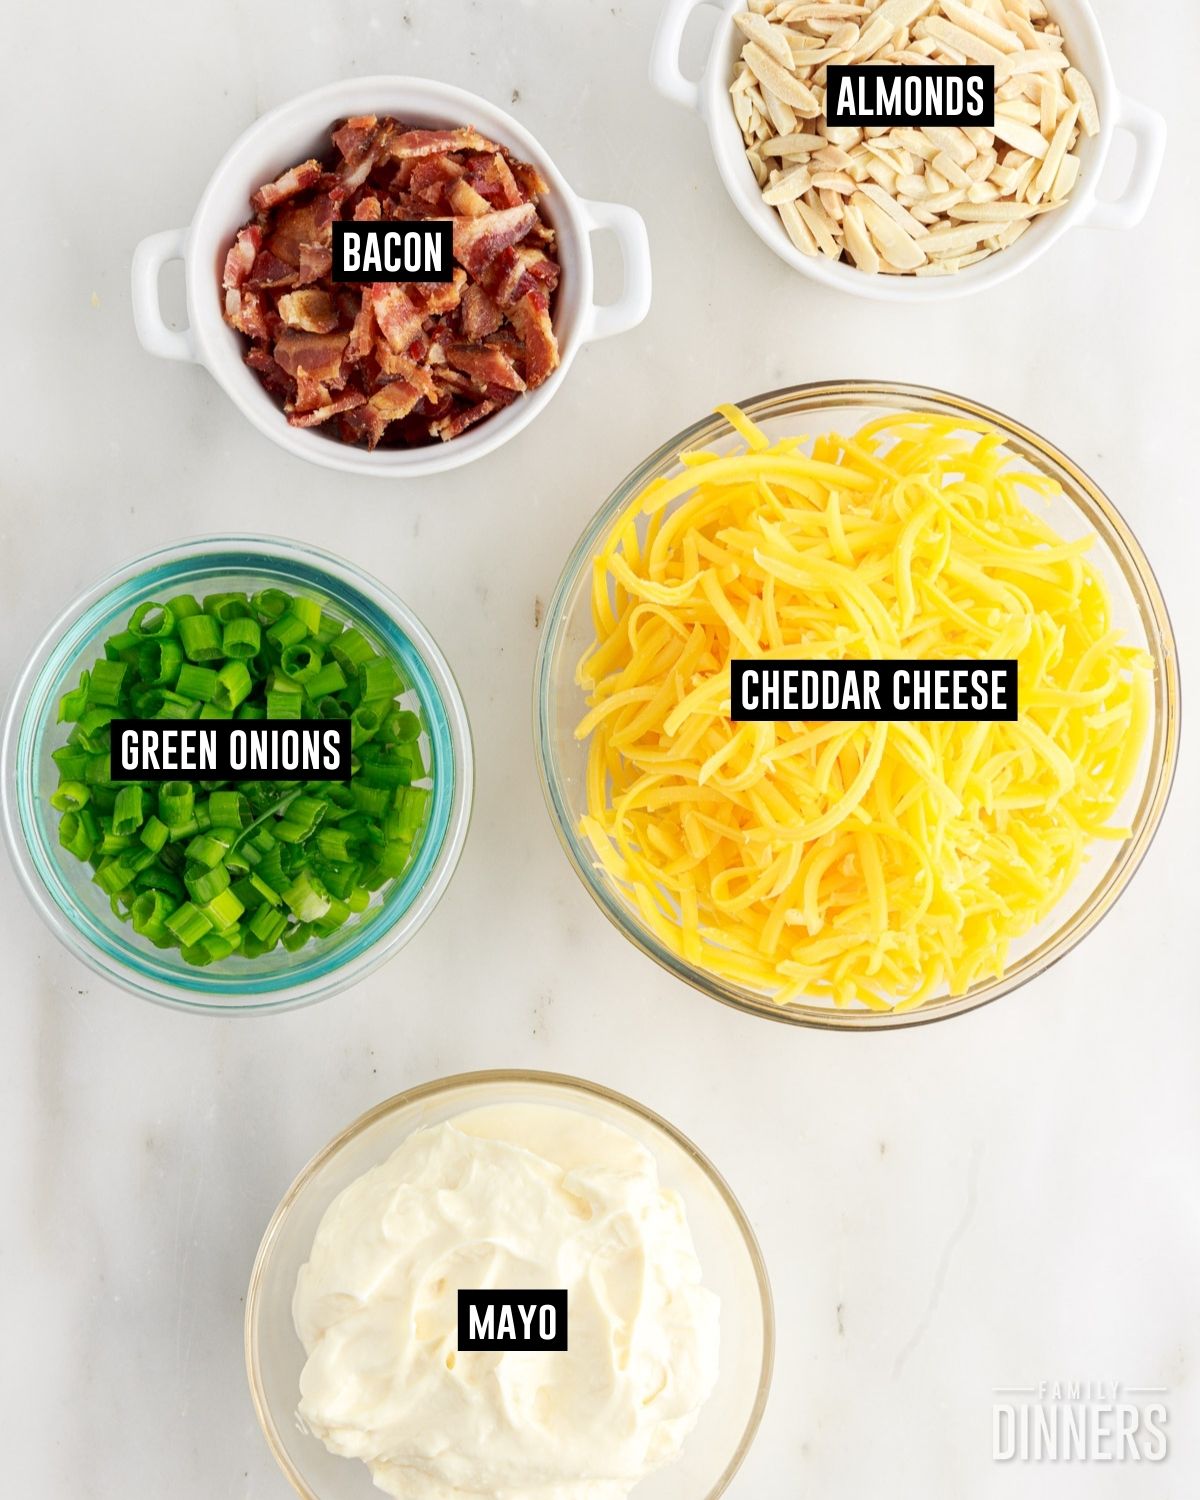 Labeled bowls of almonds, bacon crumbles, shredded cheddar cheese, green onion slices and mayonnaise. 